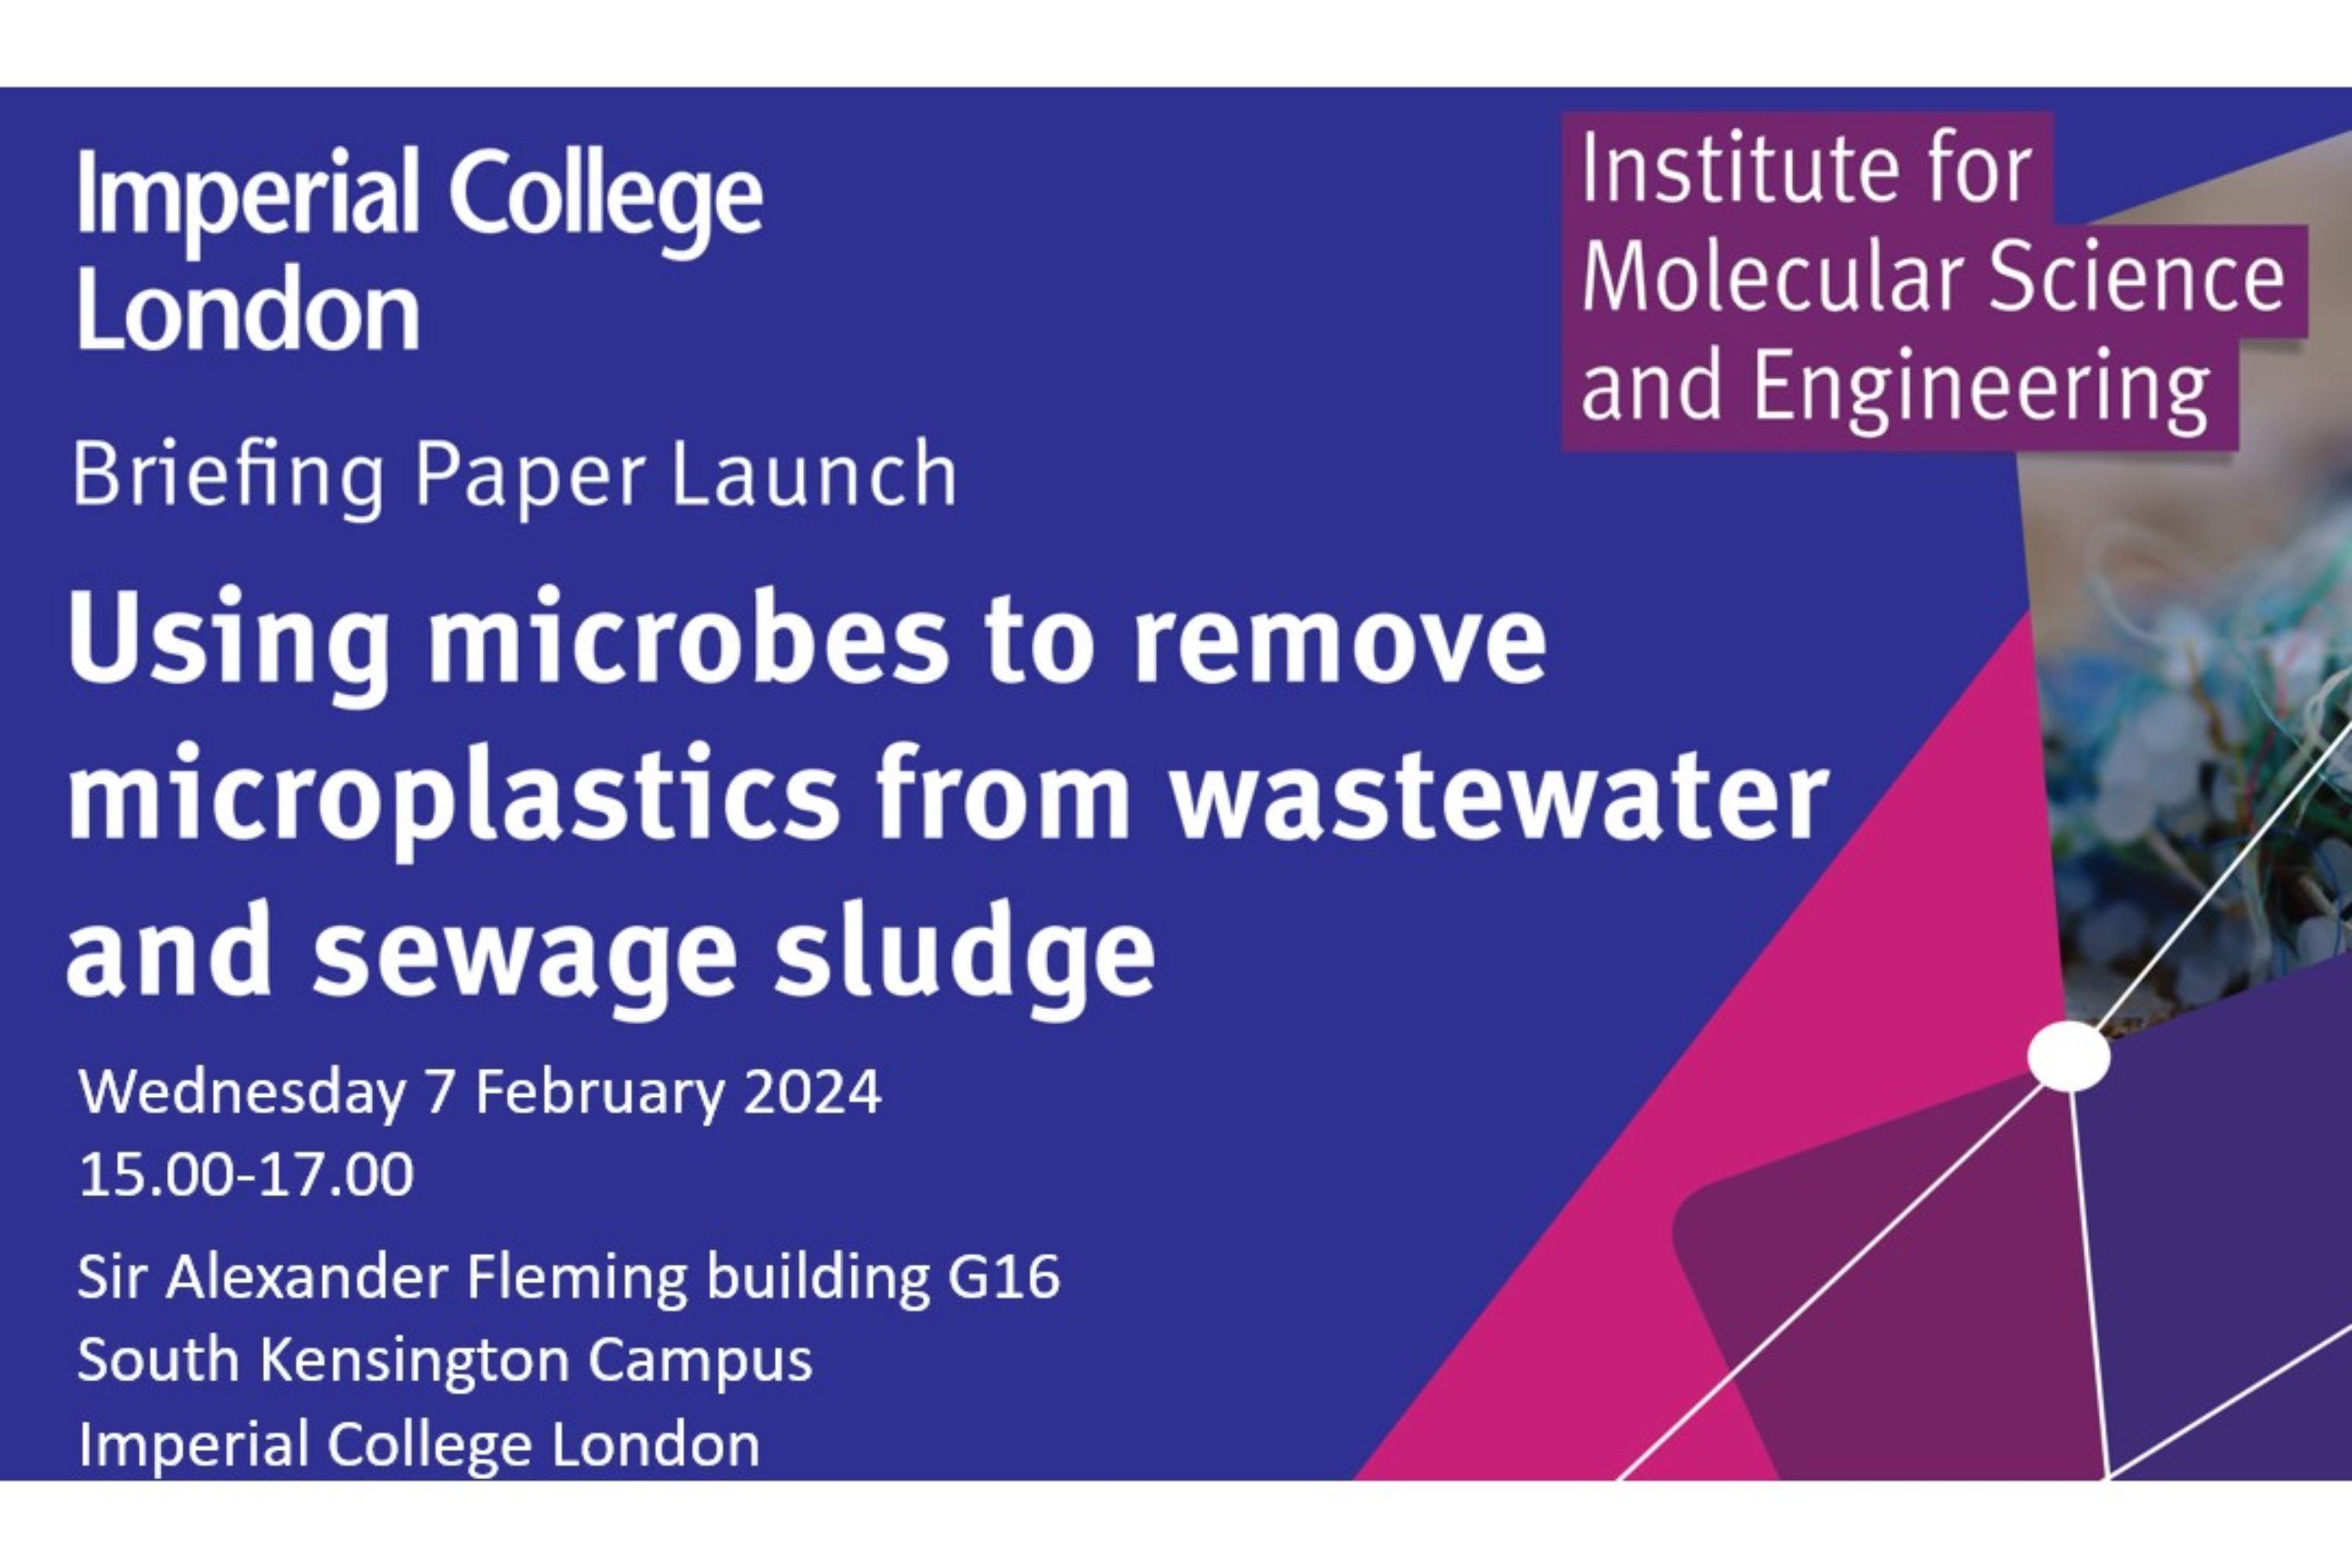 Microplastics in Wastewater Briefing Paper Launch and Panel